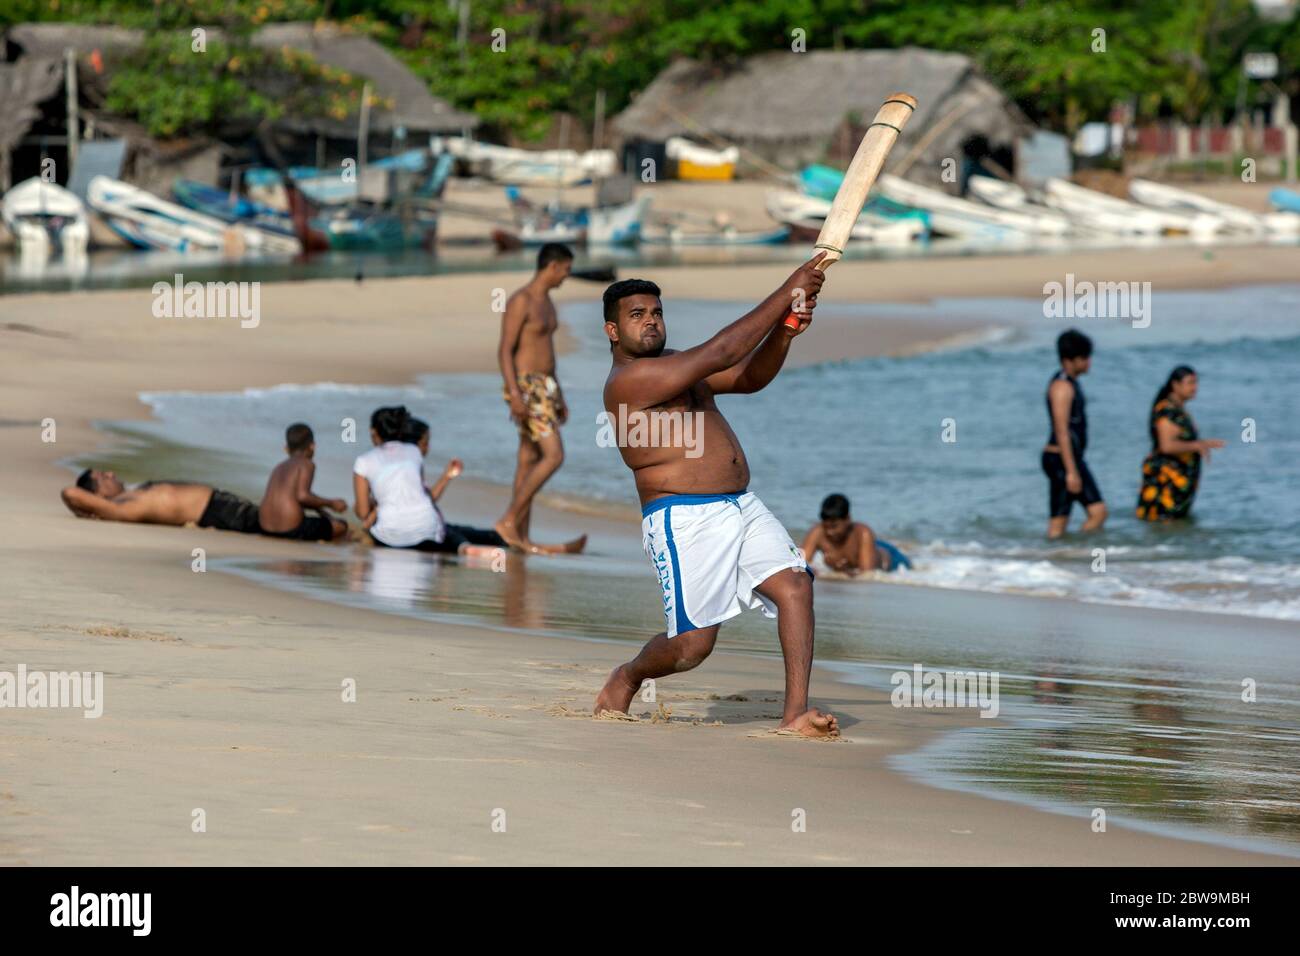 A man enjoys hitting a ball whilst playing cricket on the sand beach in Arugam Bay on the east coast of Sri Lanka. Stock Photo